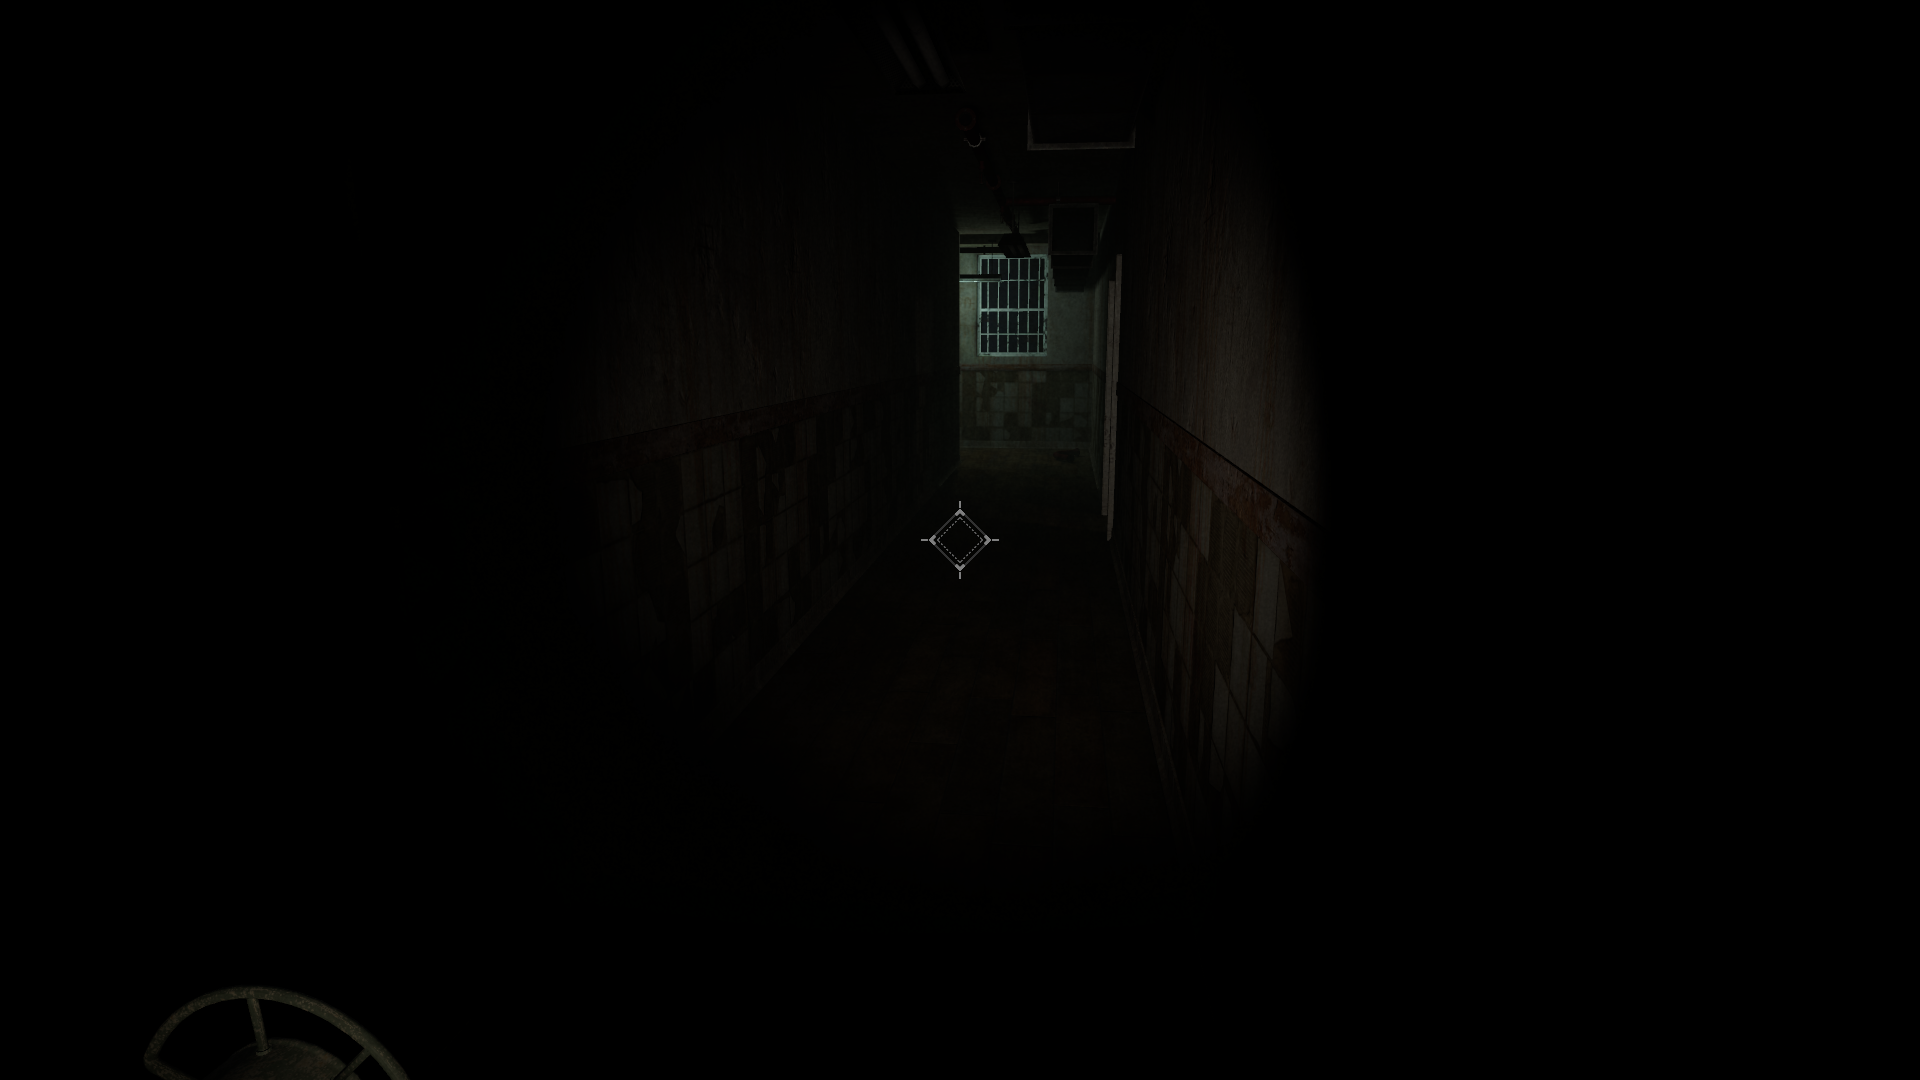 Screenshot of the game. The player is alone in a dark tiled hallway with nothing but a flashlight illuminating it.